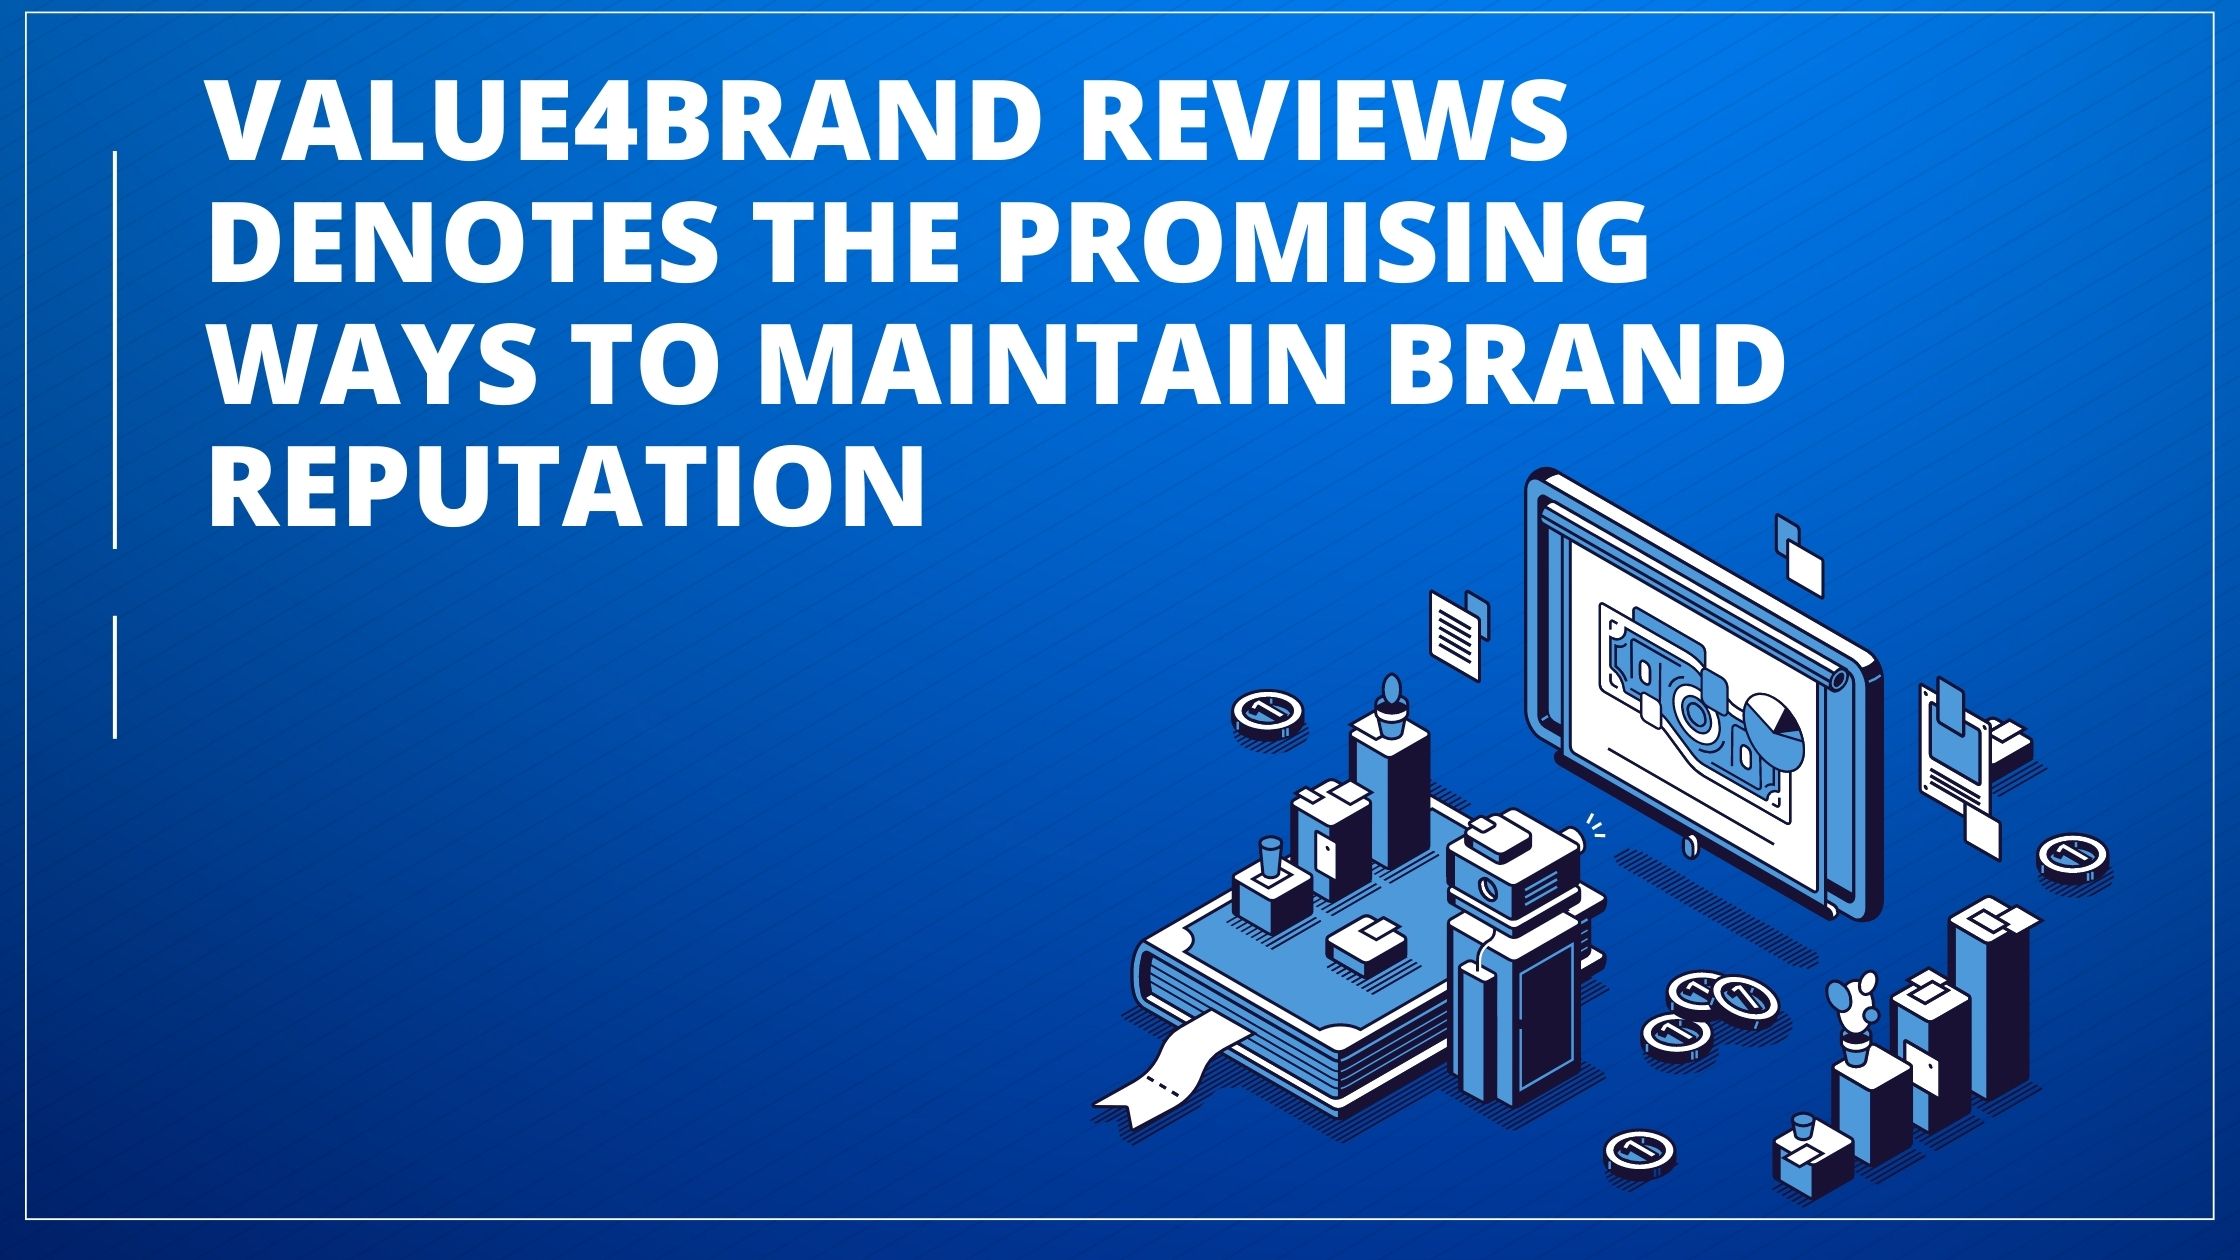 Value4Brand Reviews Denotes the Promising Ways to Maintain Brand Reputation